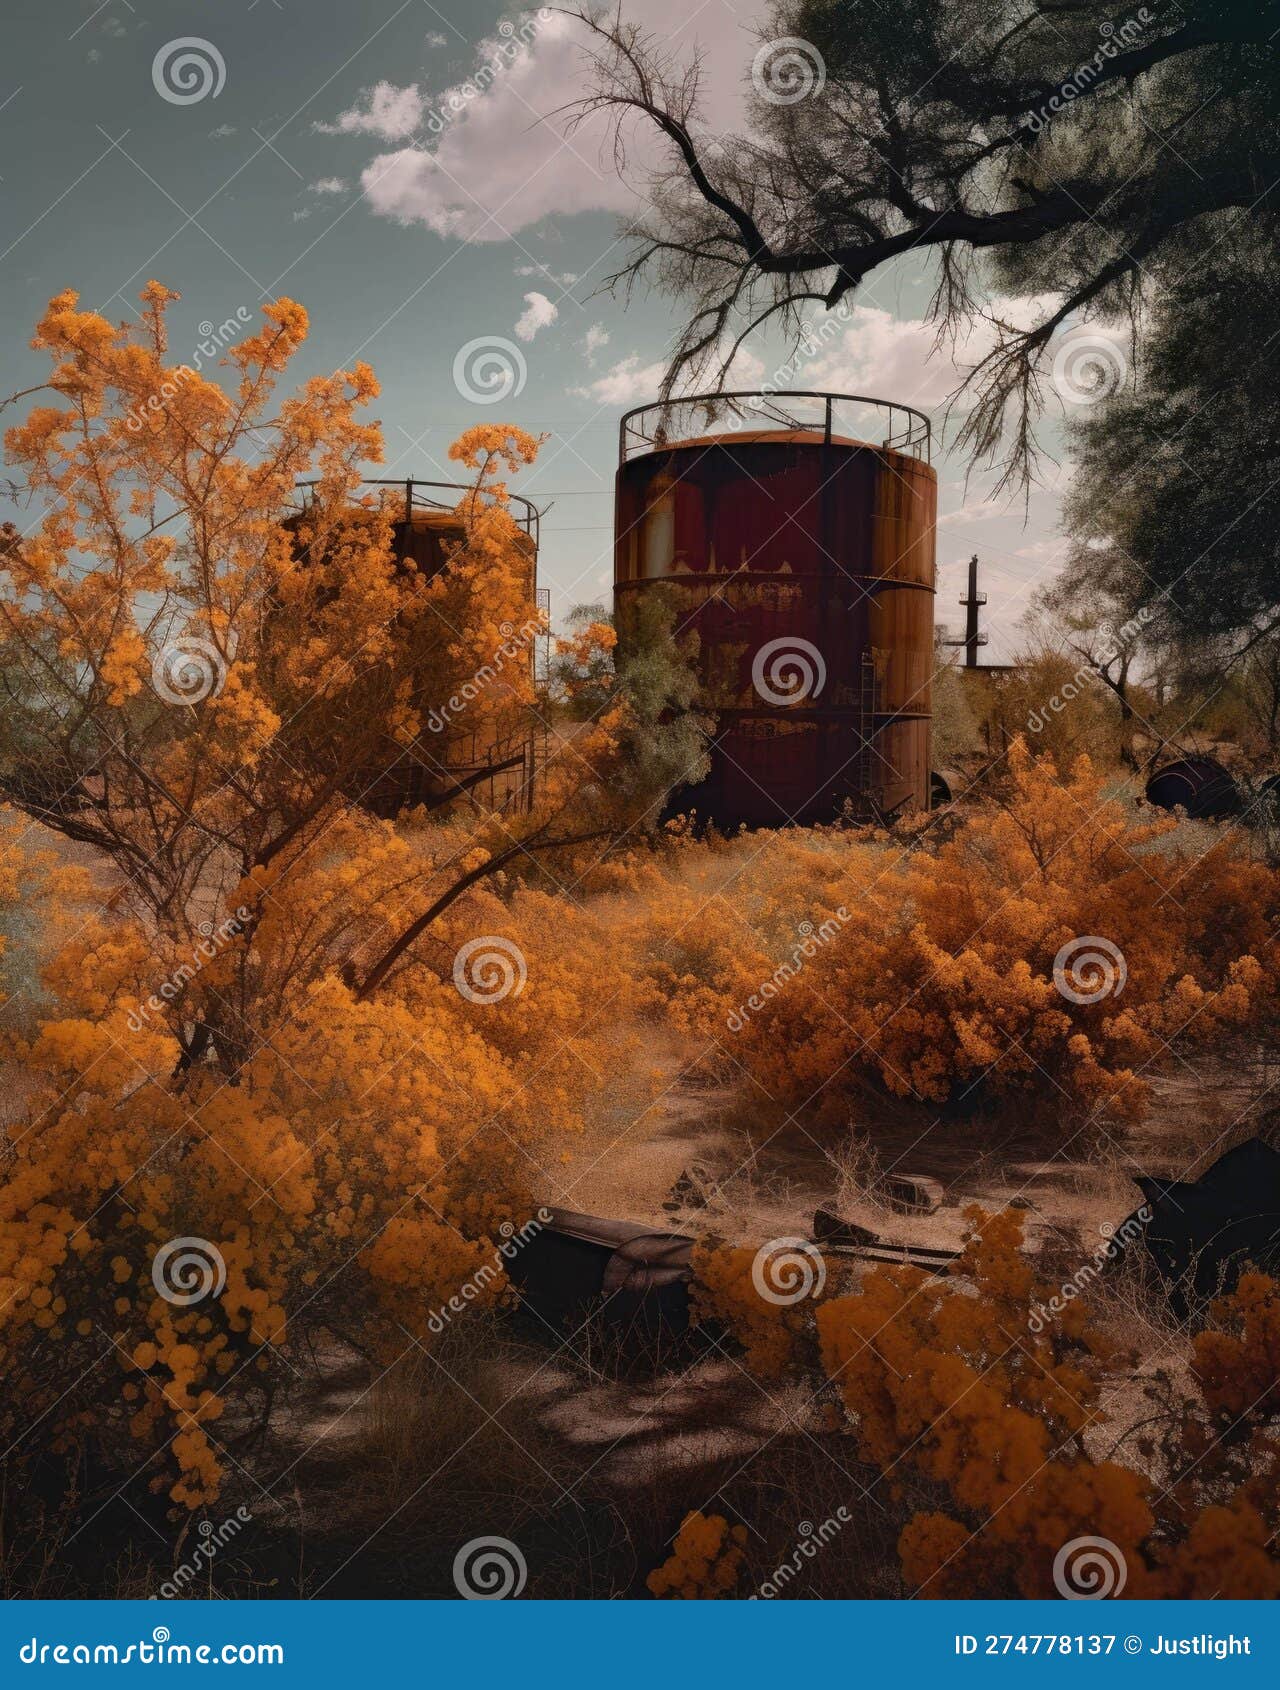 nature reclaiming the land vibrant trees in bloom and the rusted silhouette of broken tanks in the background. abandoned